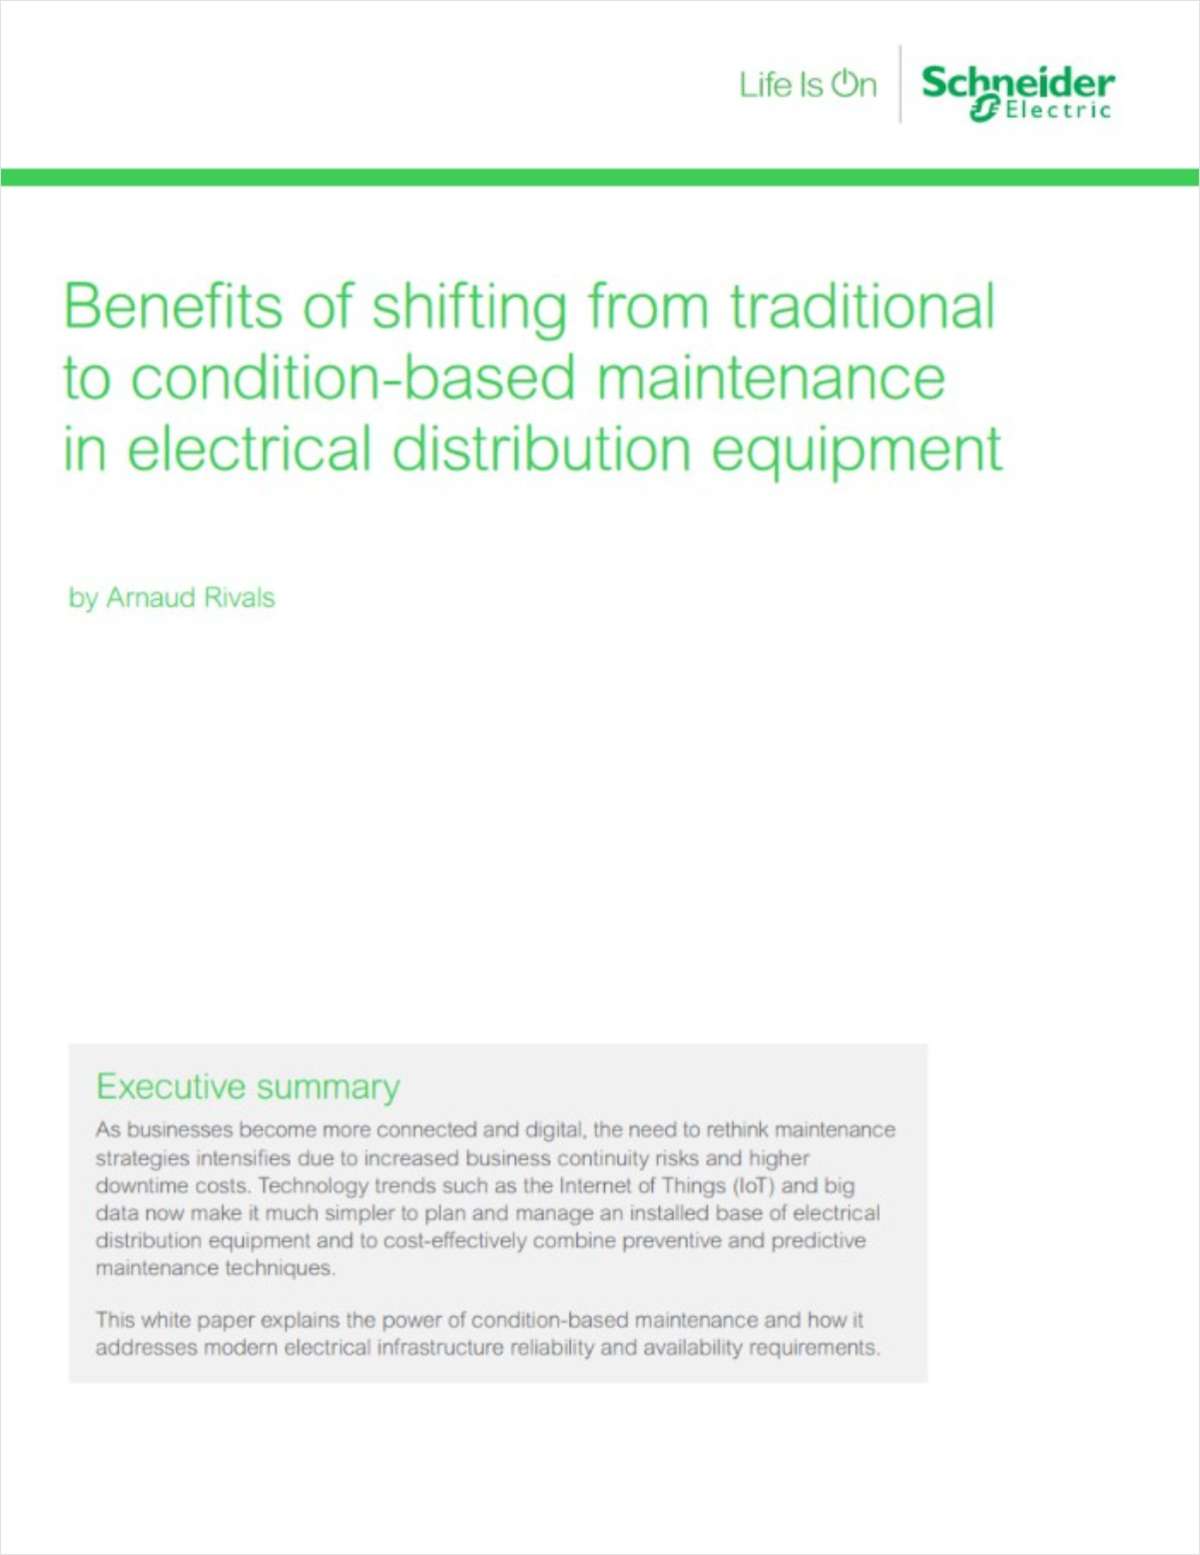 Benefits of shifting from traditional to condition-based maintenance in electrical distribution equipment